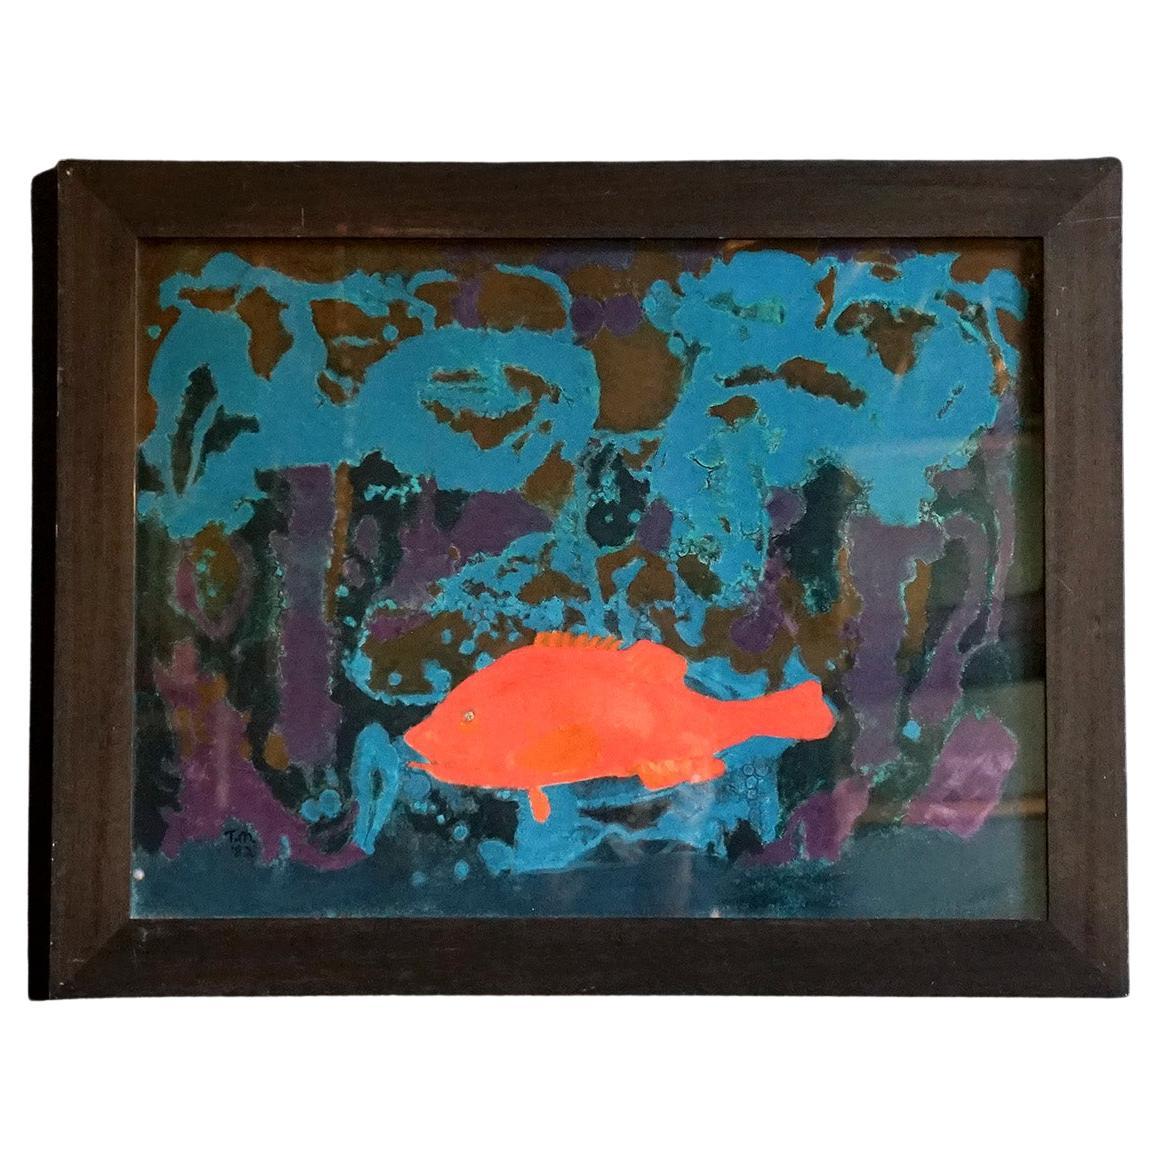 Vintage Expressionist Underwater Scene With Fish 1980s Original Acrylic Painting For Sale